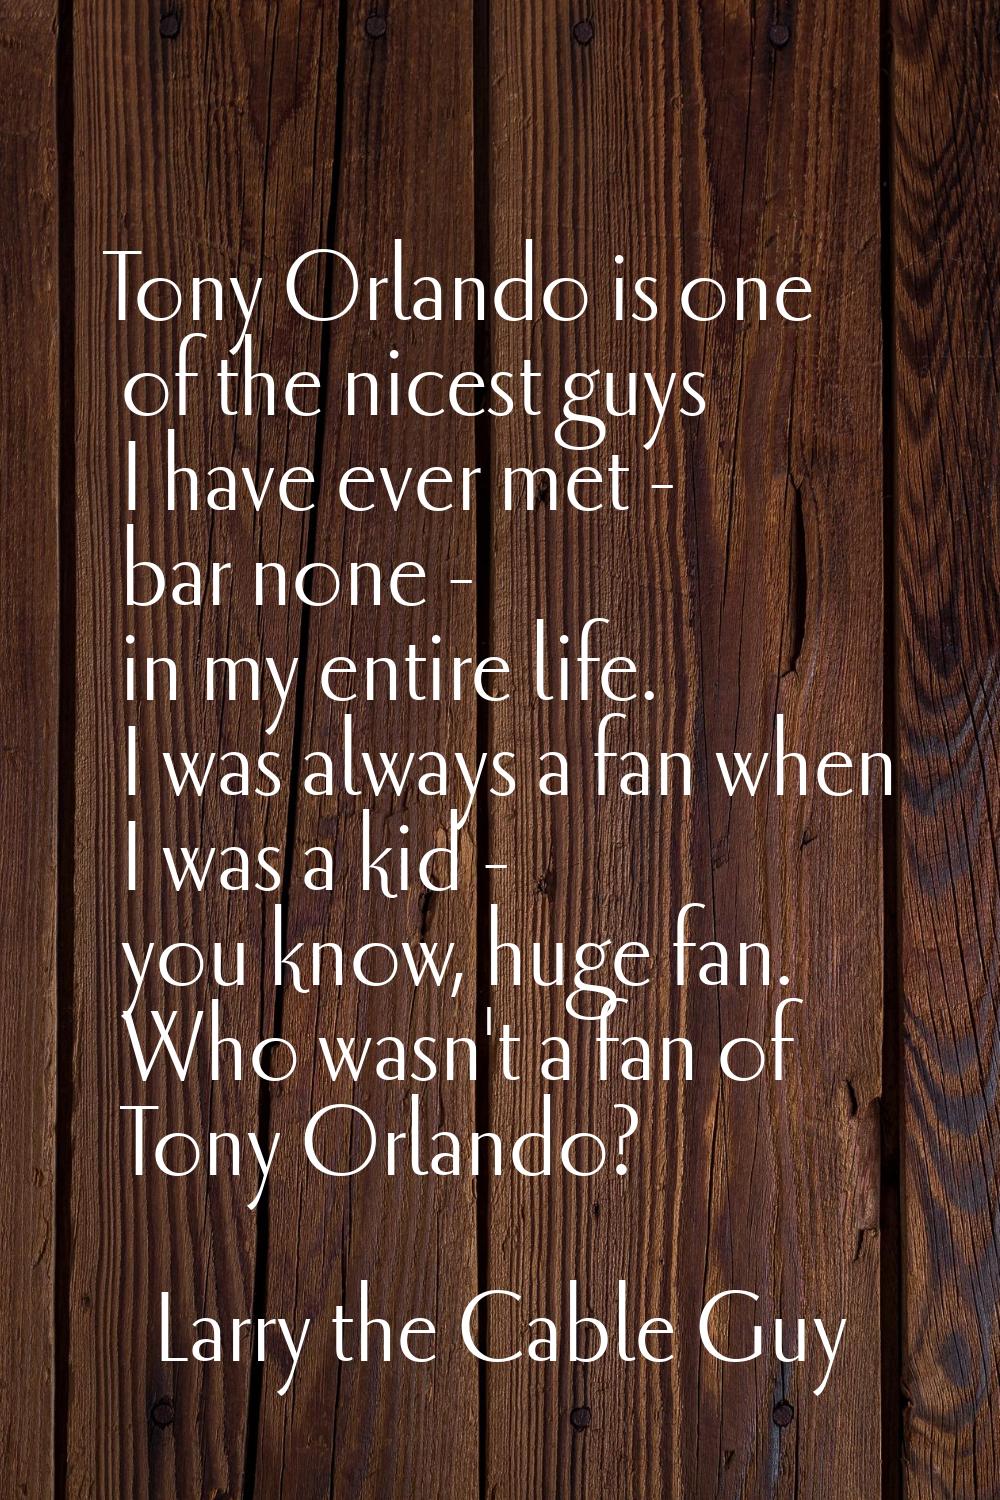 Tony Orlando is one of the nicest guys I have ever met - bar none - in my entire life. I was always